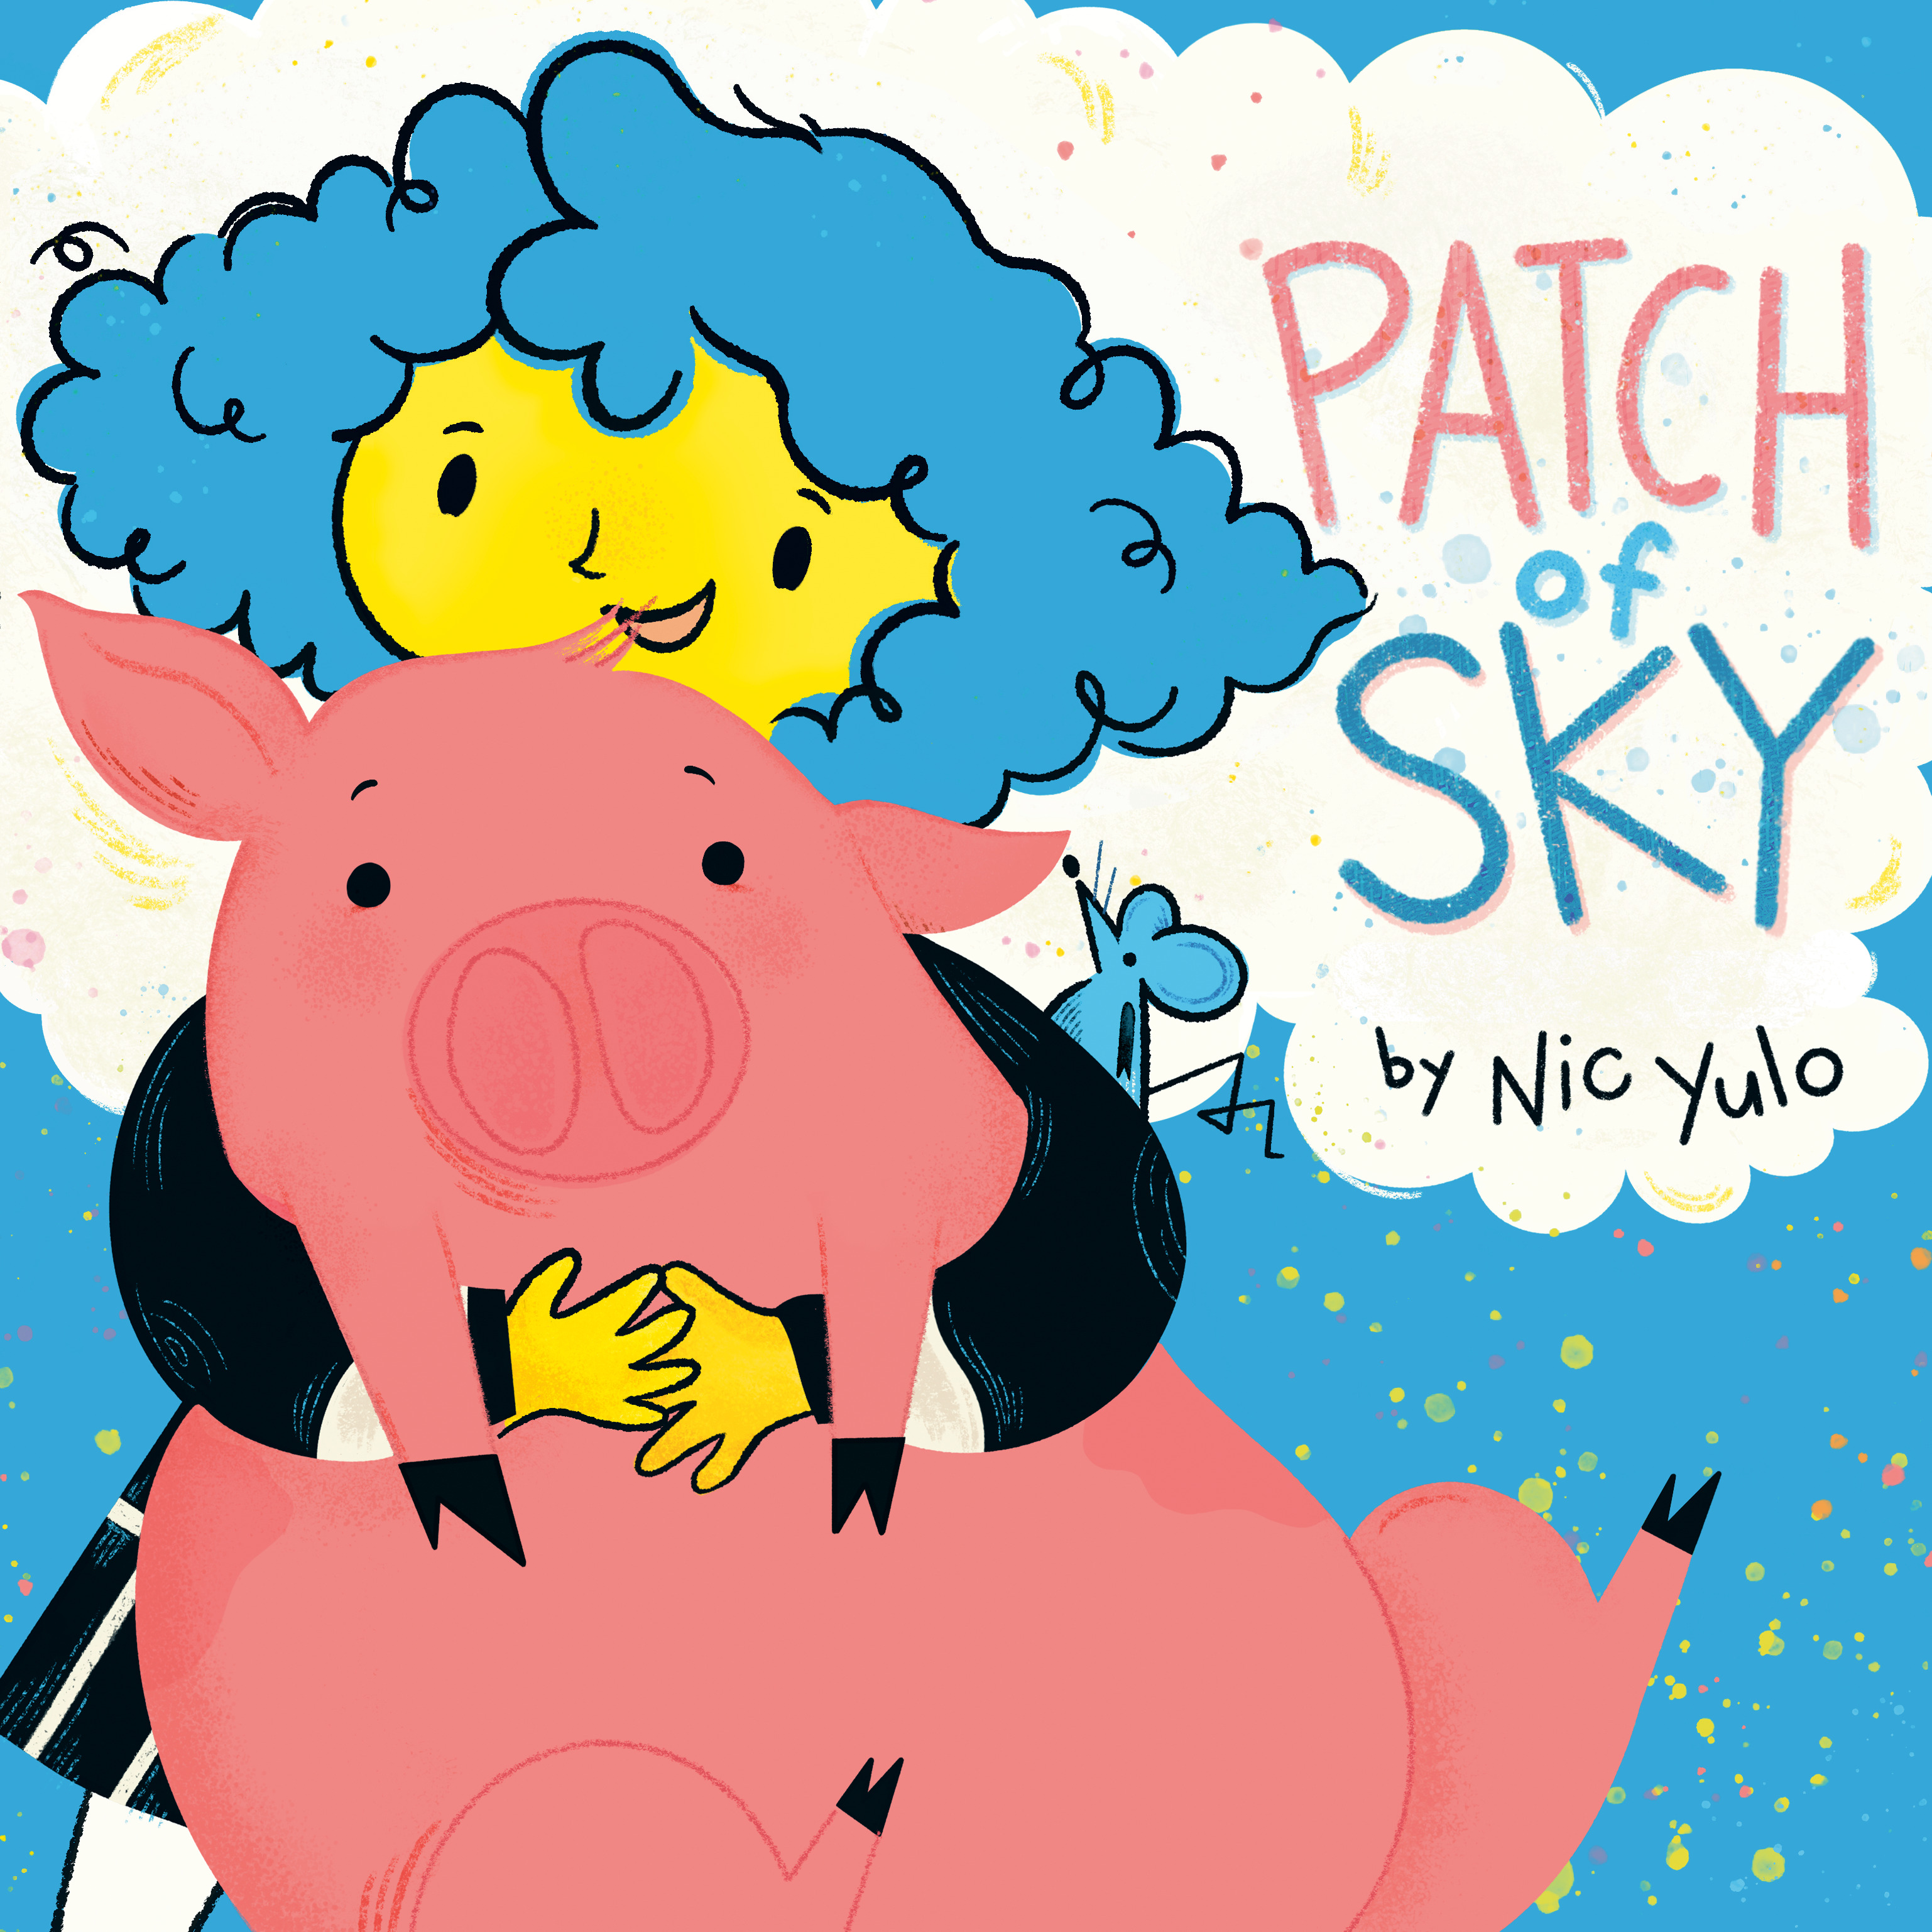 Patch of Sky | Yulo, Nic